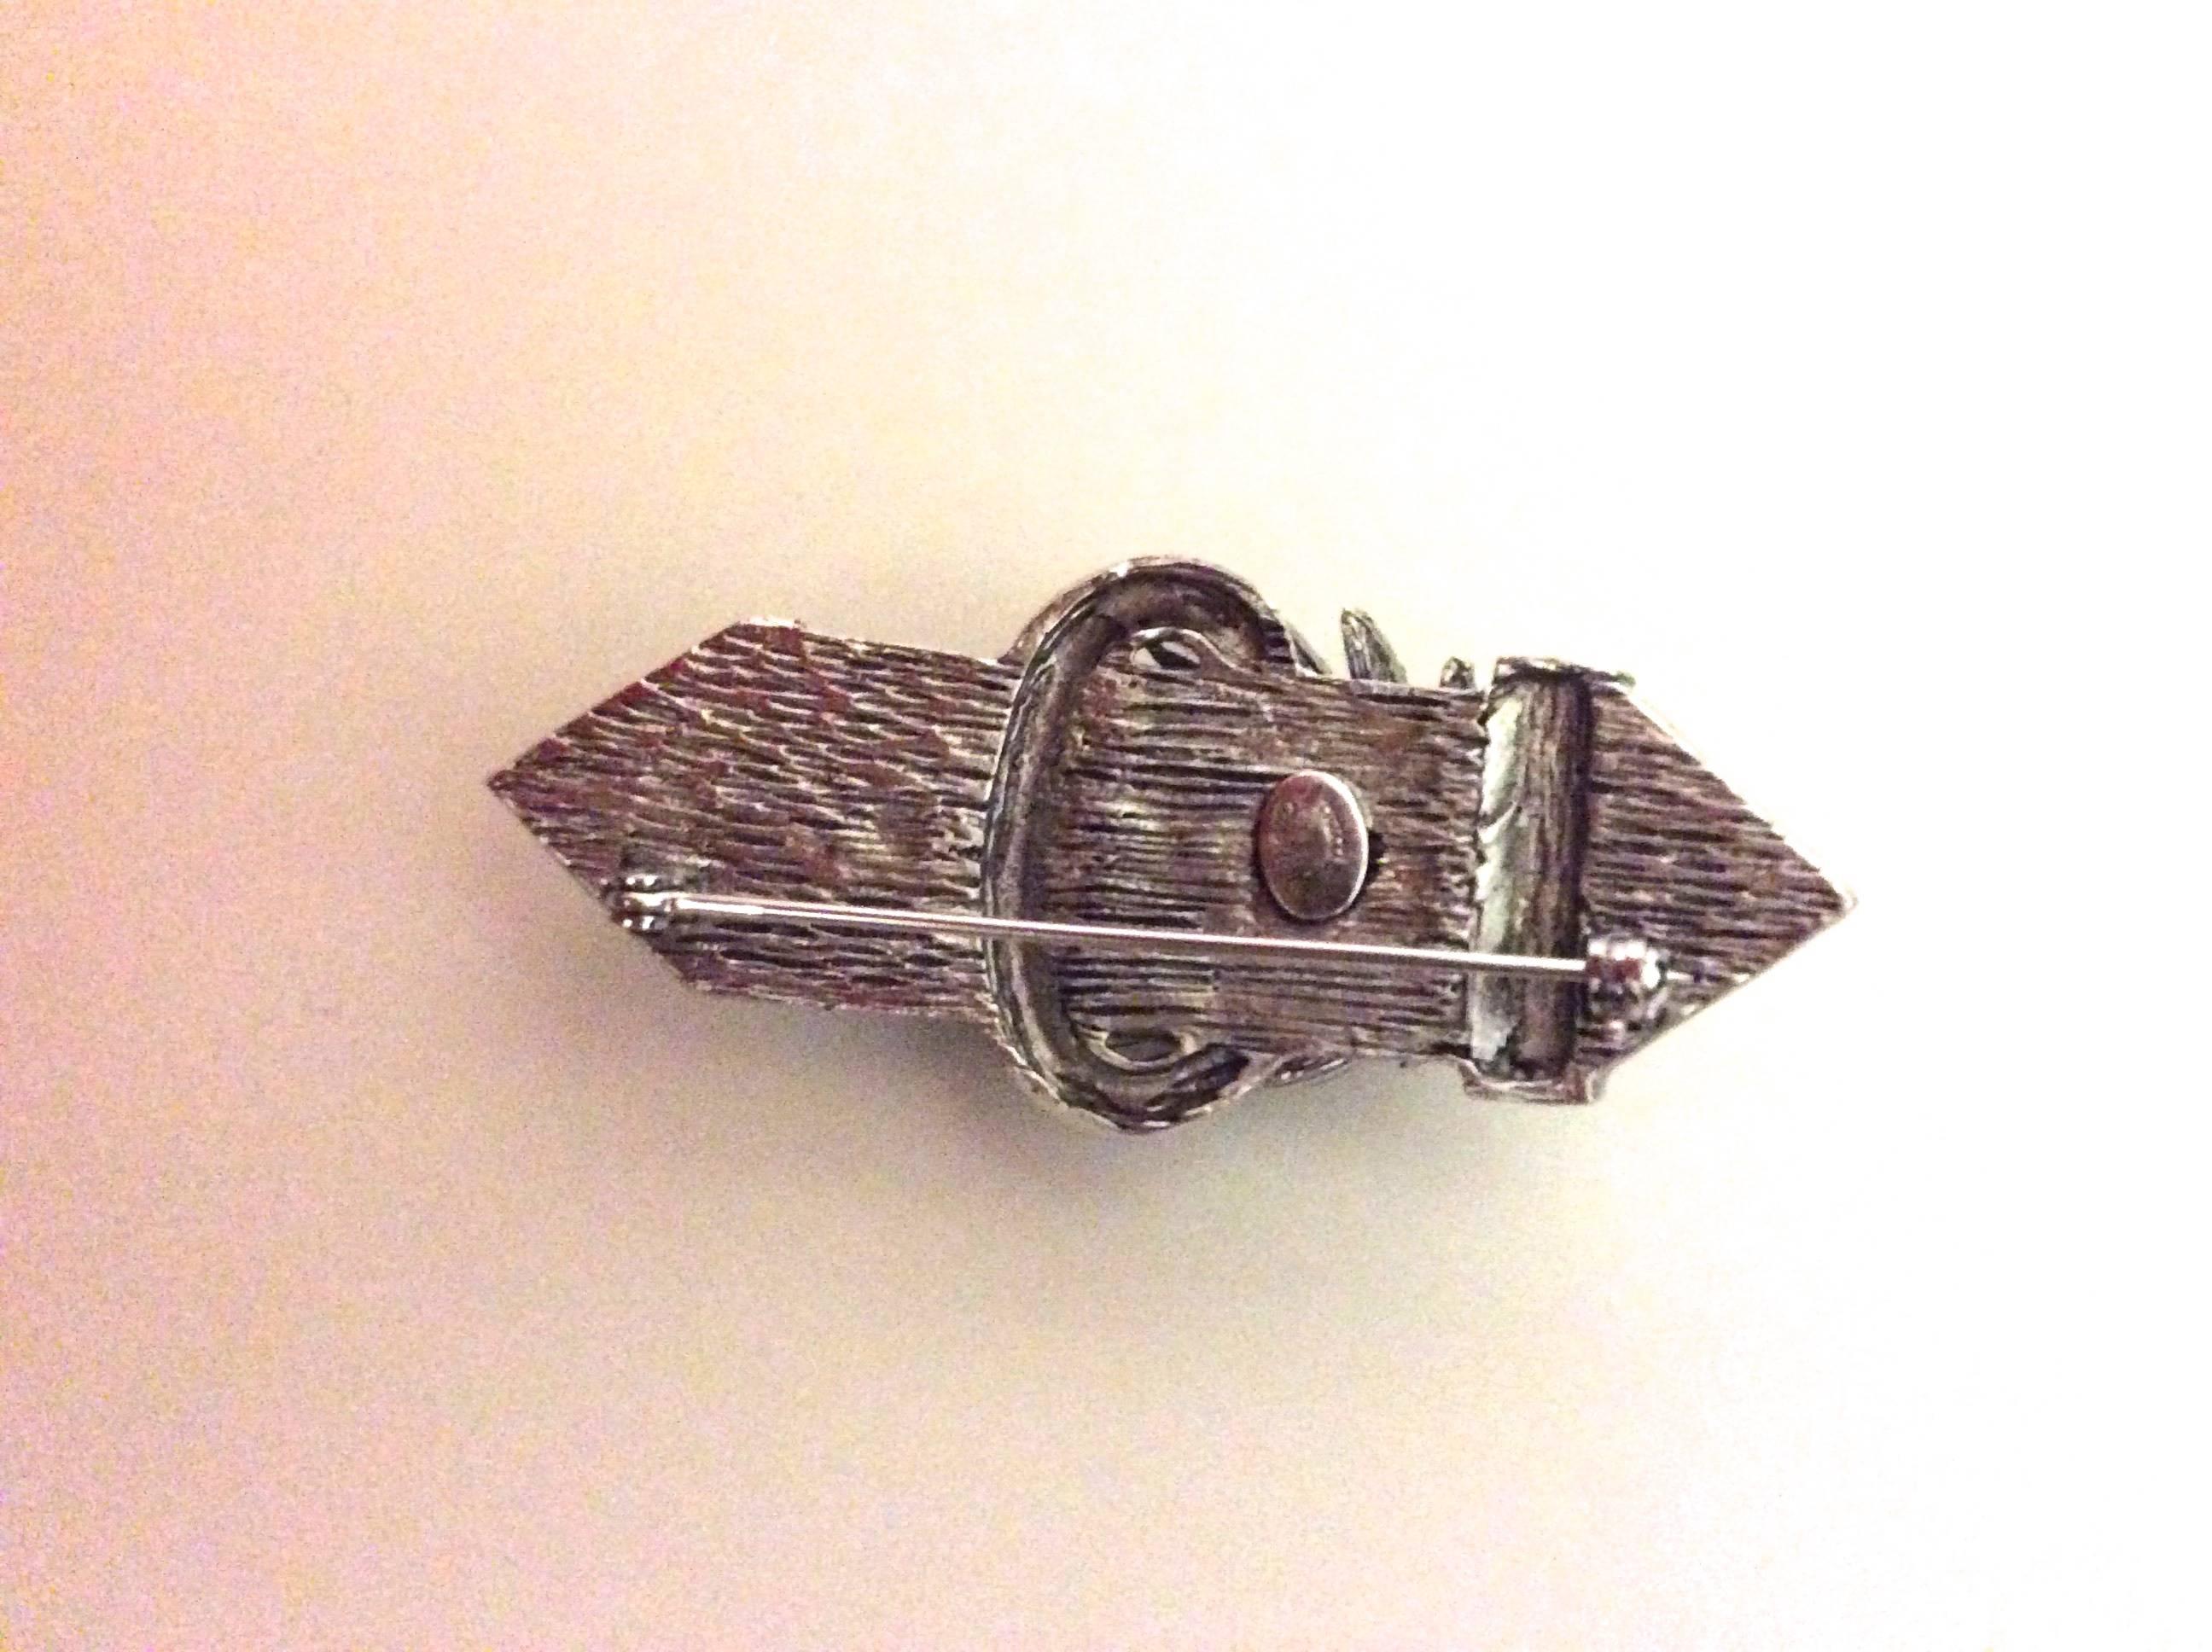 Presented here is a rare brooch from designer Hattie Carnegie. The brooch is from the 1950's. The brooch is a brushed silver tone metal that measures 2 inches long and .5 inches high and can be worn upwards or sideways. The beautiful cascading